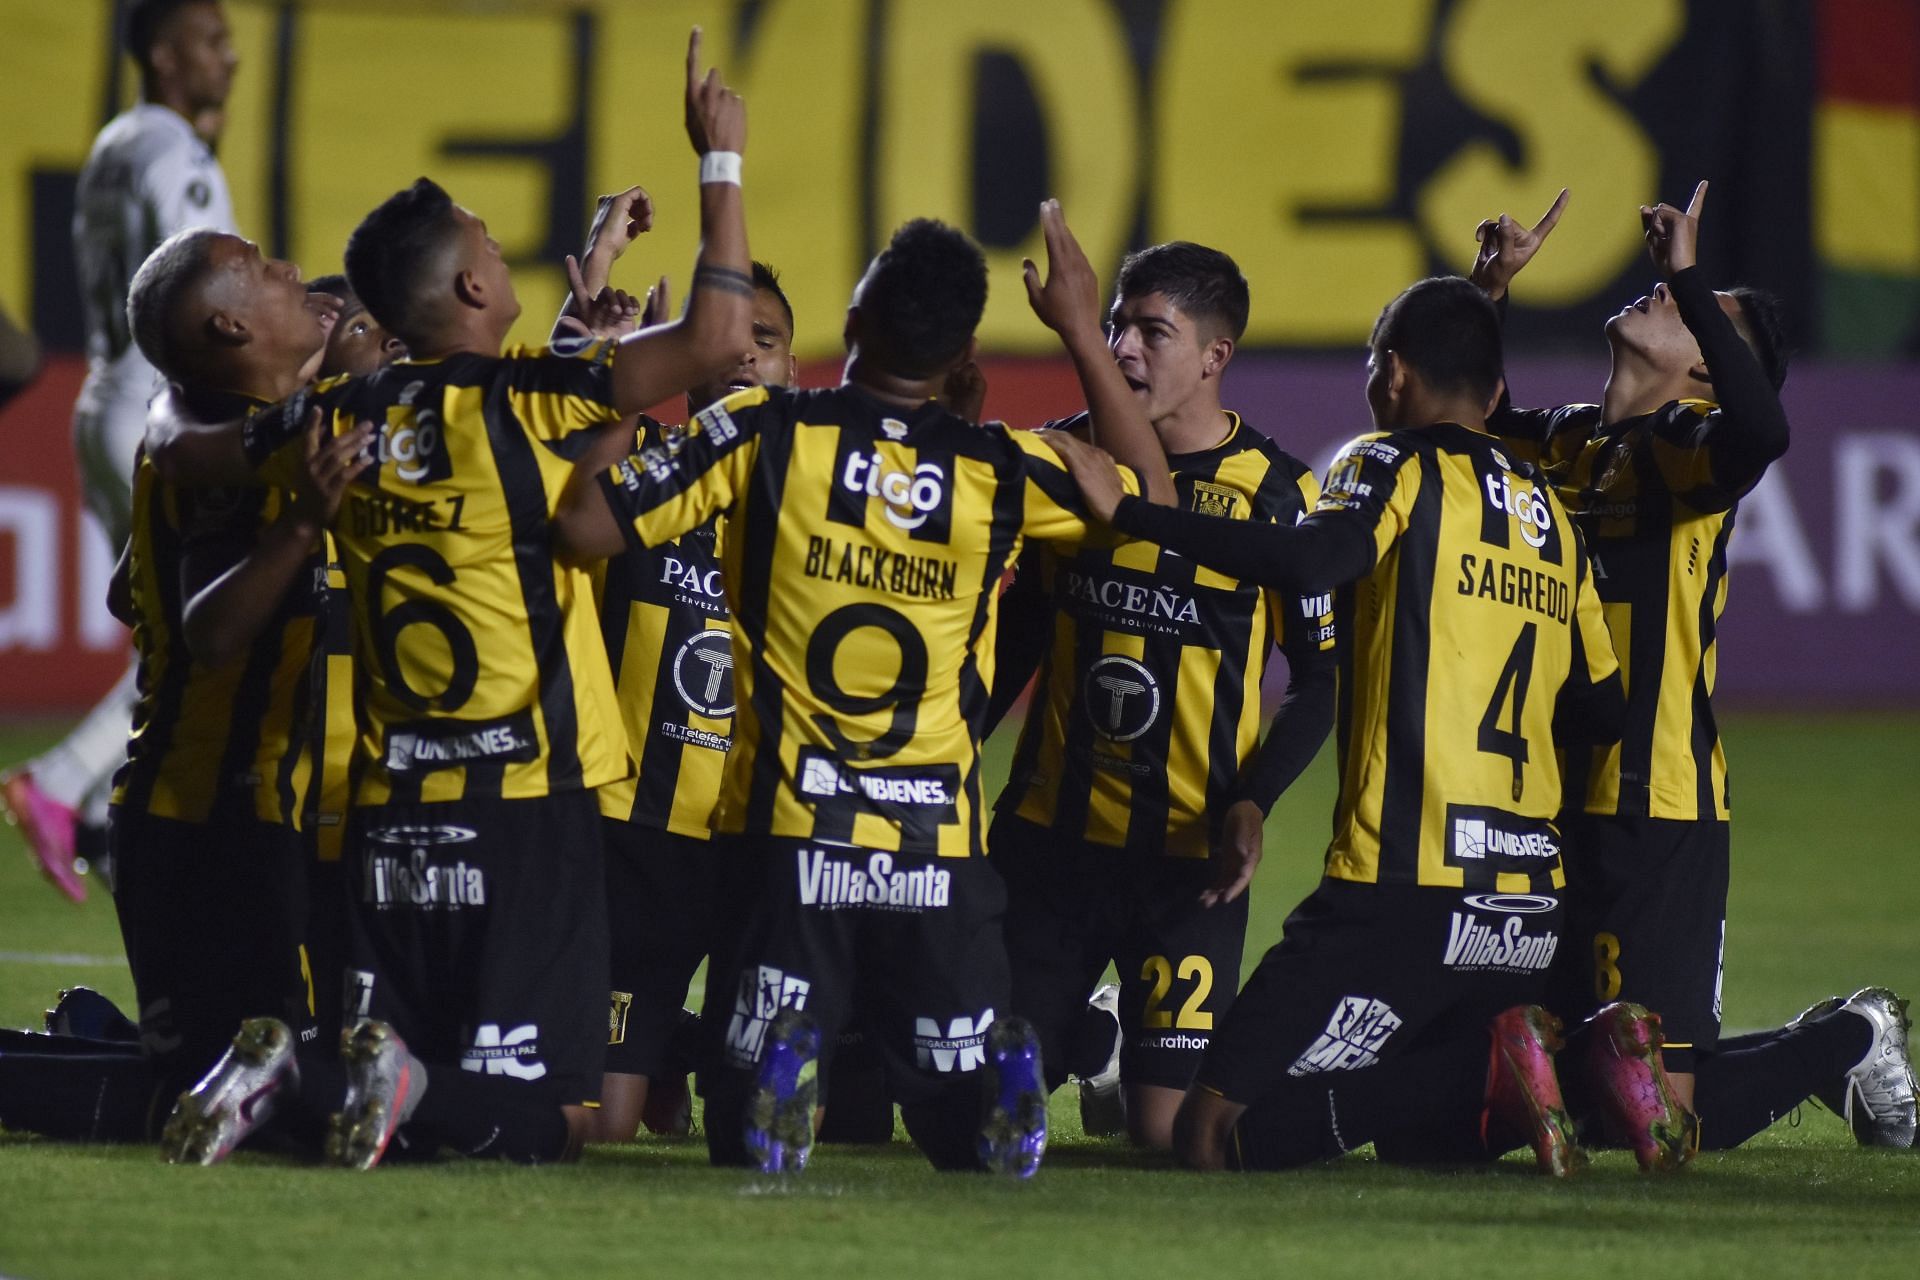 The Strongest will face Libertad on Friday